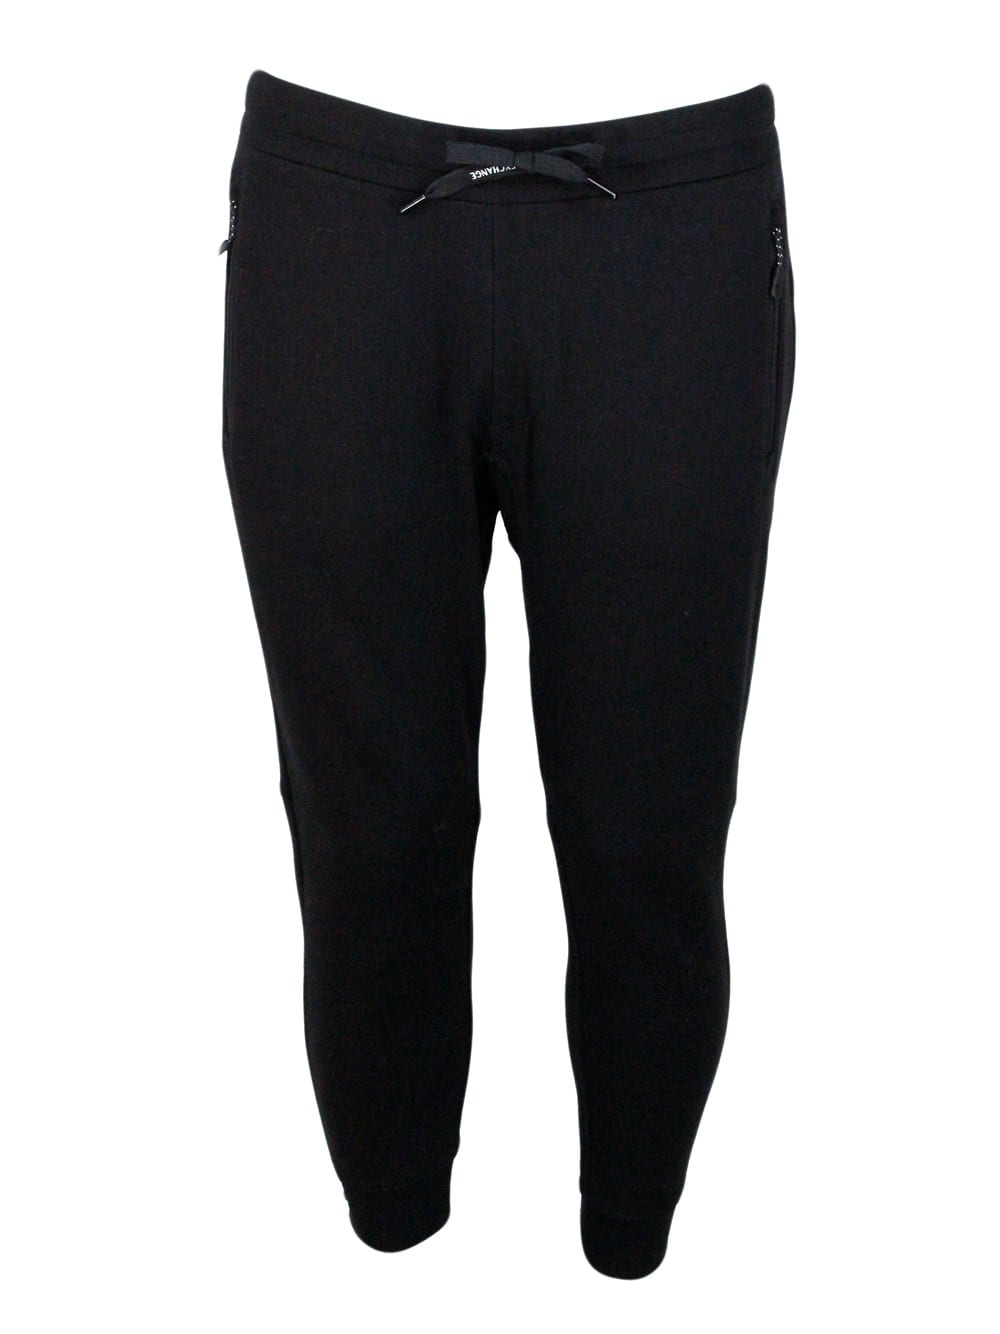 Cotton Fleece Jogging Trousers With Drawstring At The Waist And Cuff At The Bottom